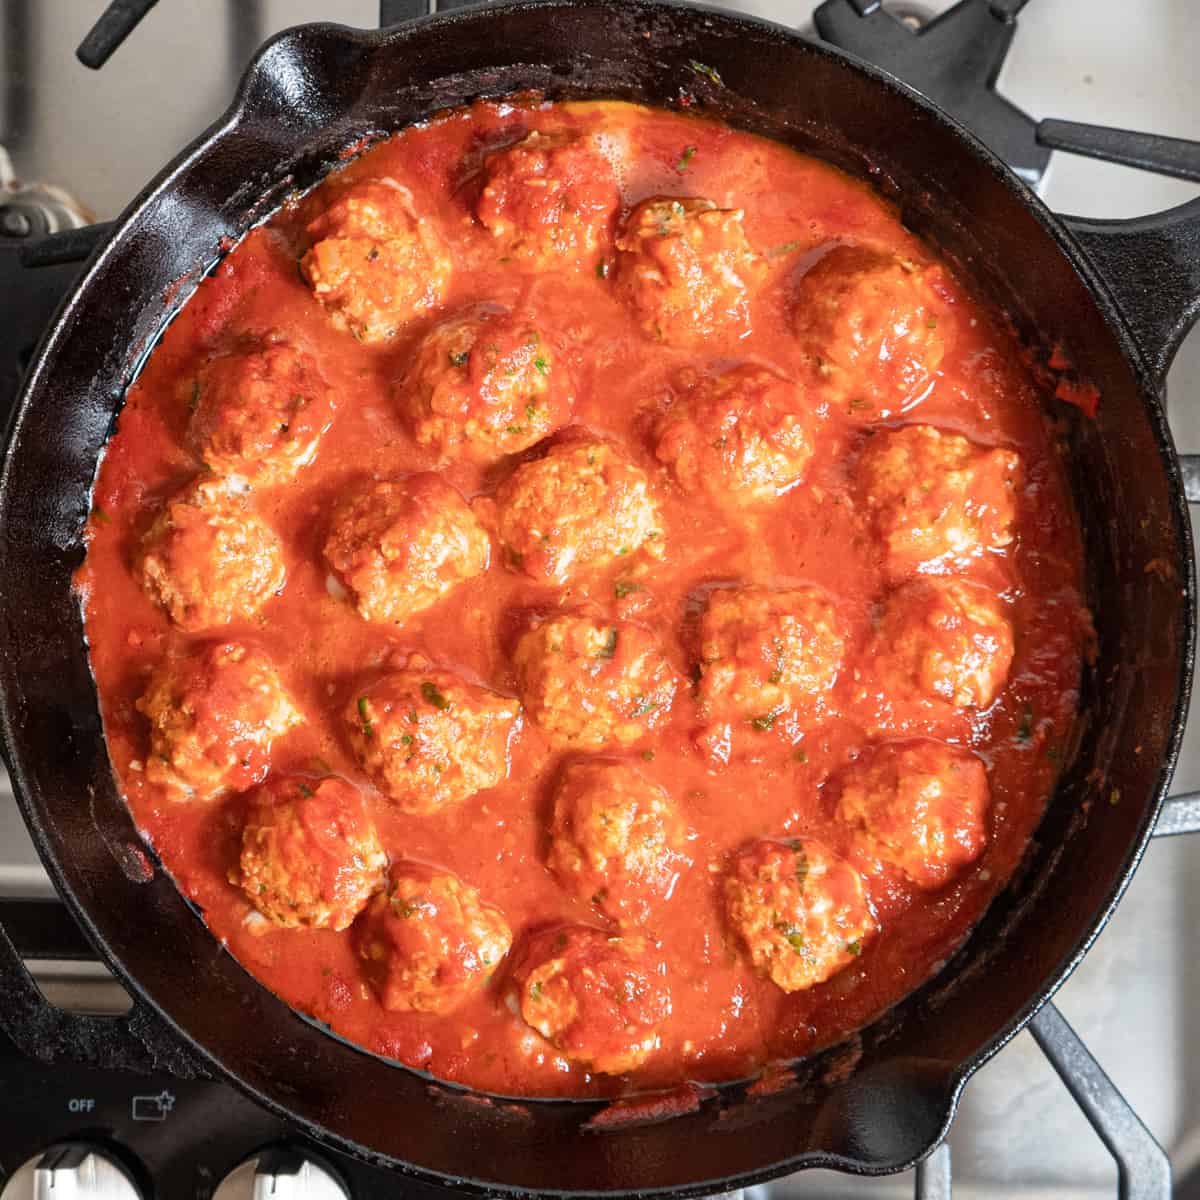 meatballs are flipped in the skillet